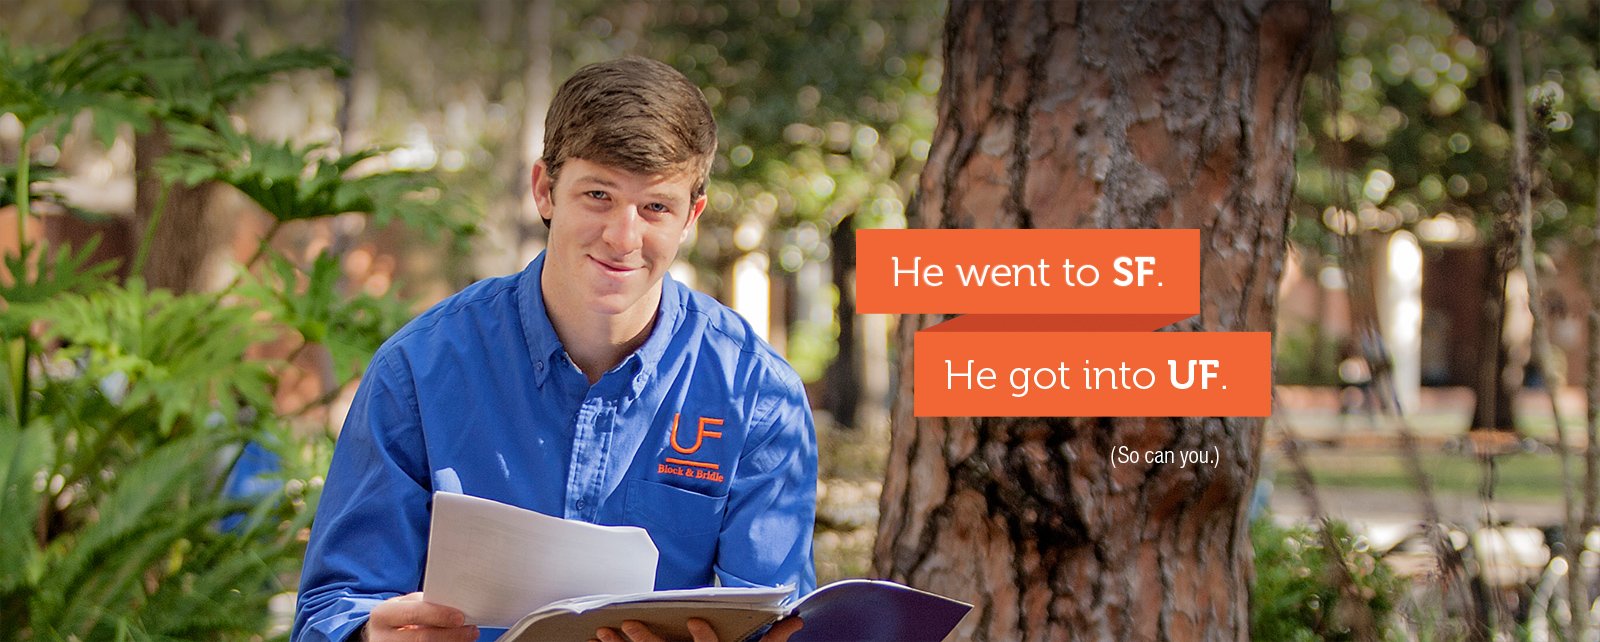 Christian went to SF. He got into UF.